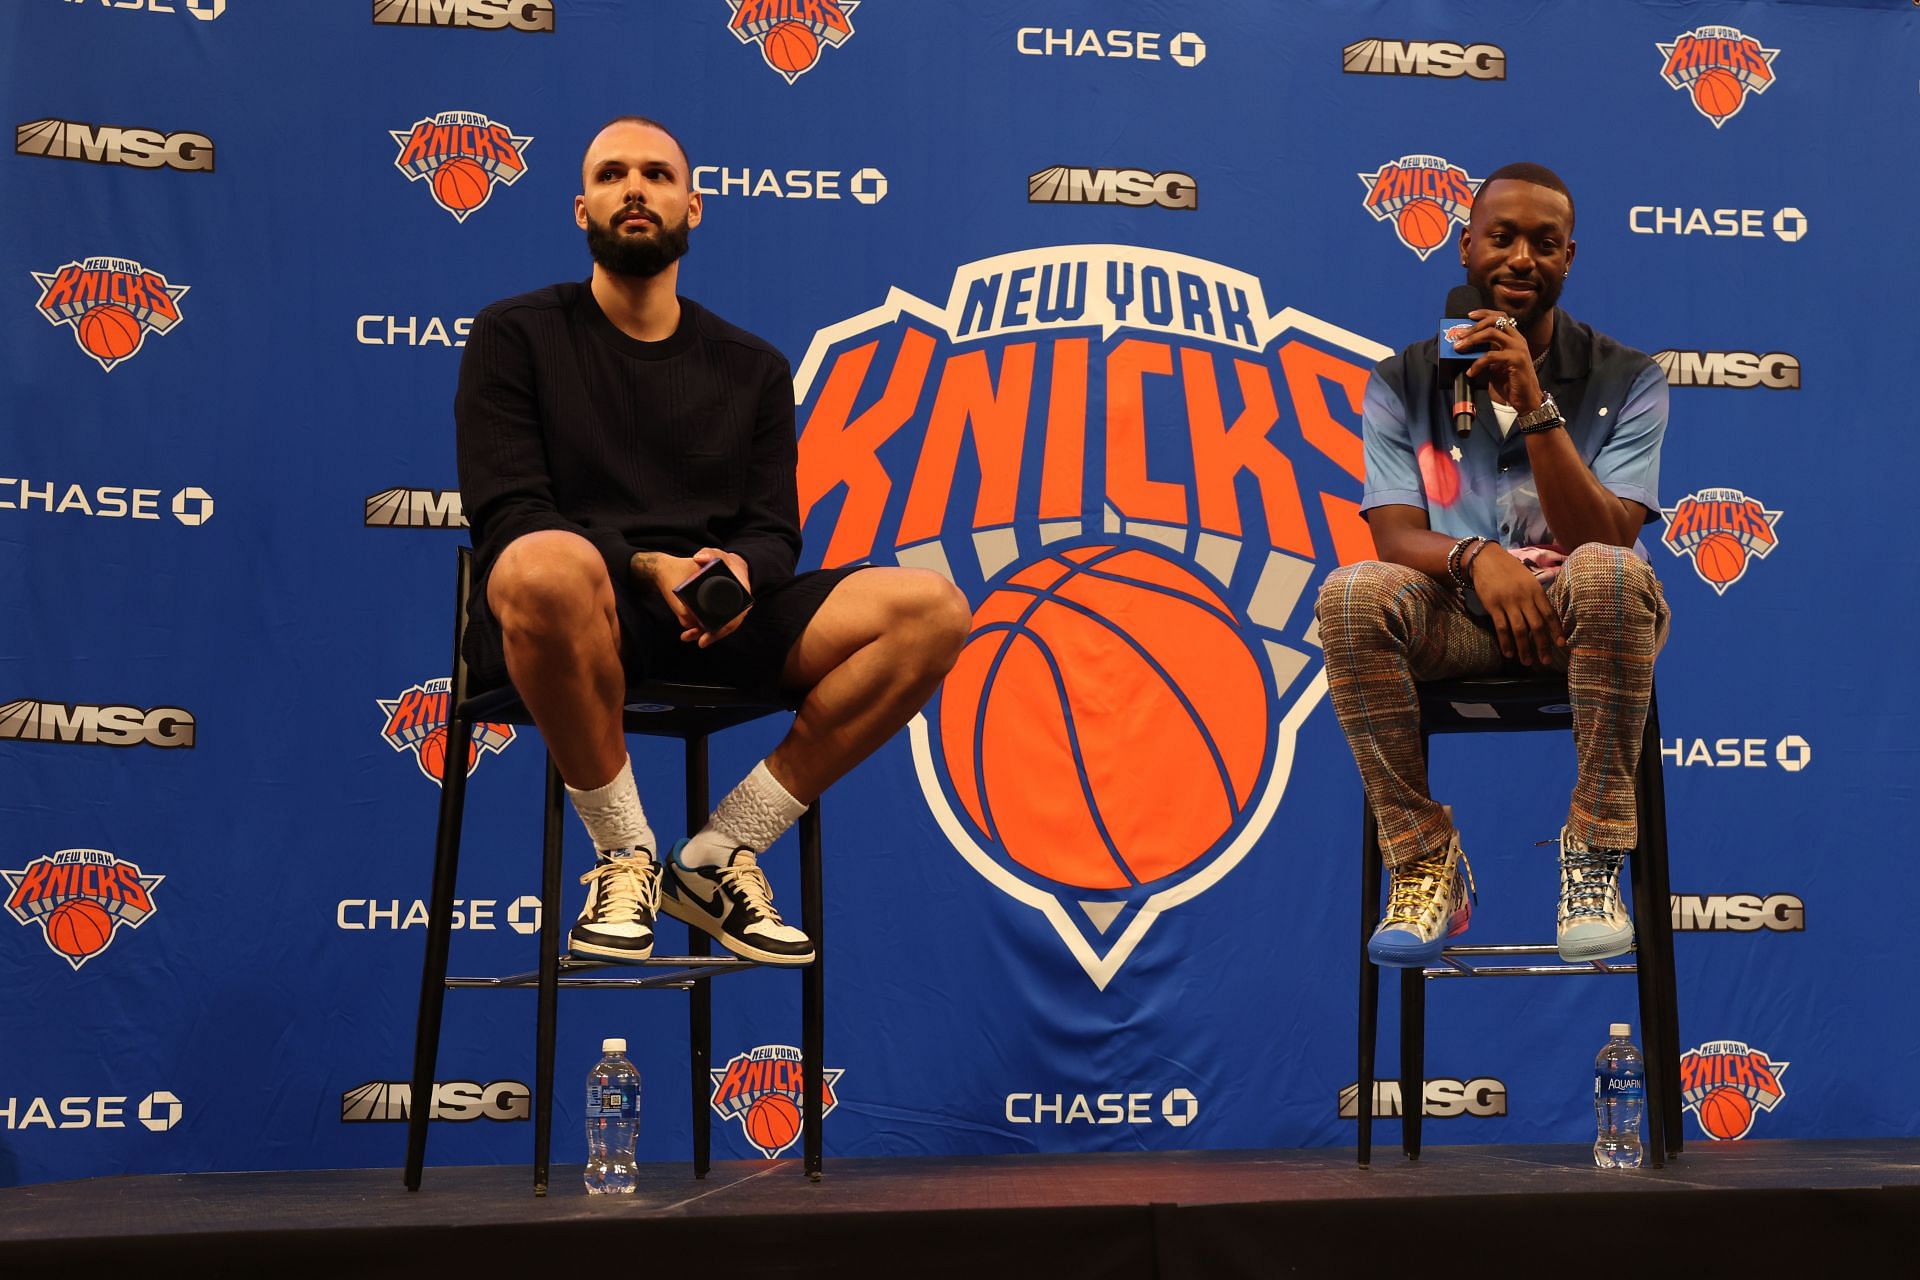 Former Boston Celtics players Kemba Walker and Evan Fournier will be key pieces for the New York Knicks this season.